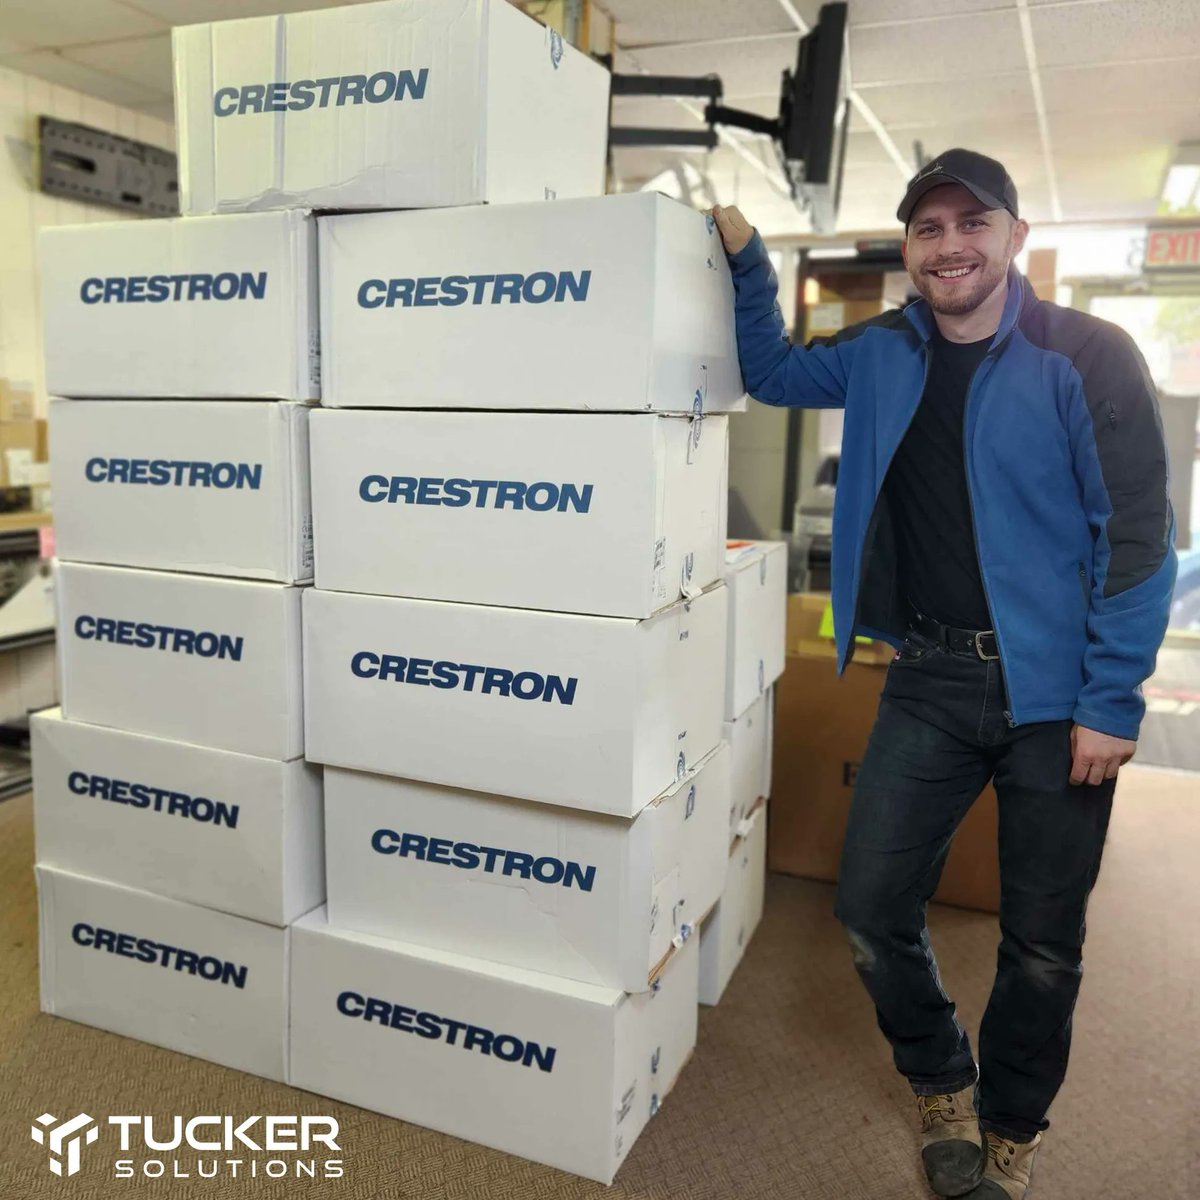 Large jobs call for large deliveries and a solid set of hands to help! 

#TuckerSolutions #Crestron #ProAV #audiovisual #avindustry #avintegration